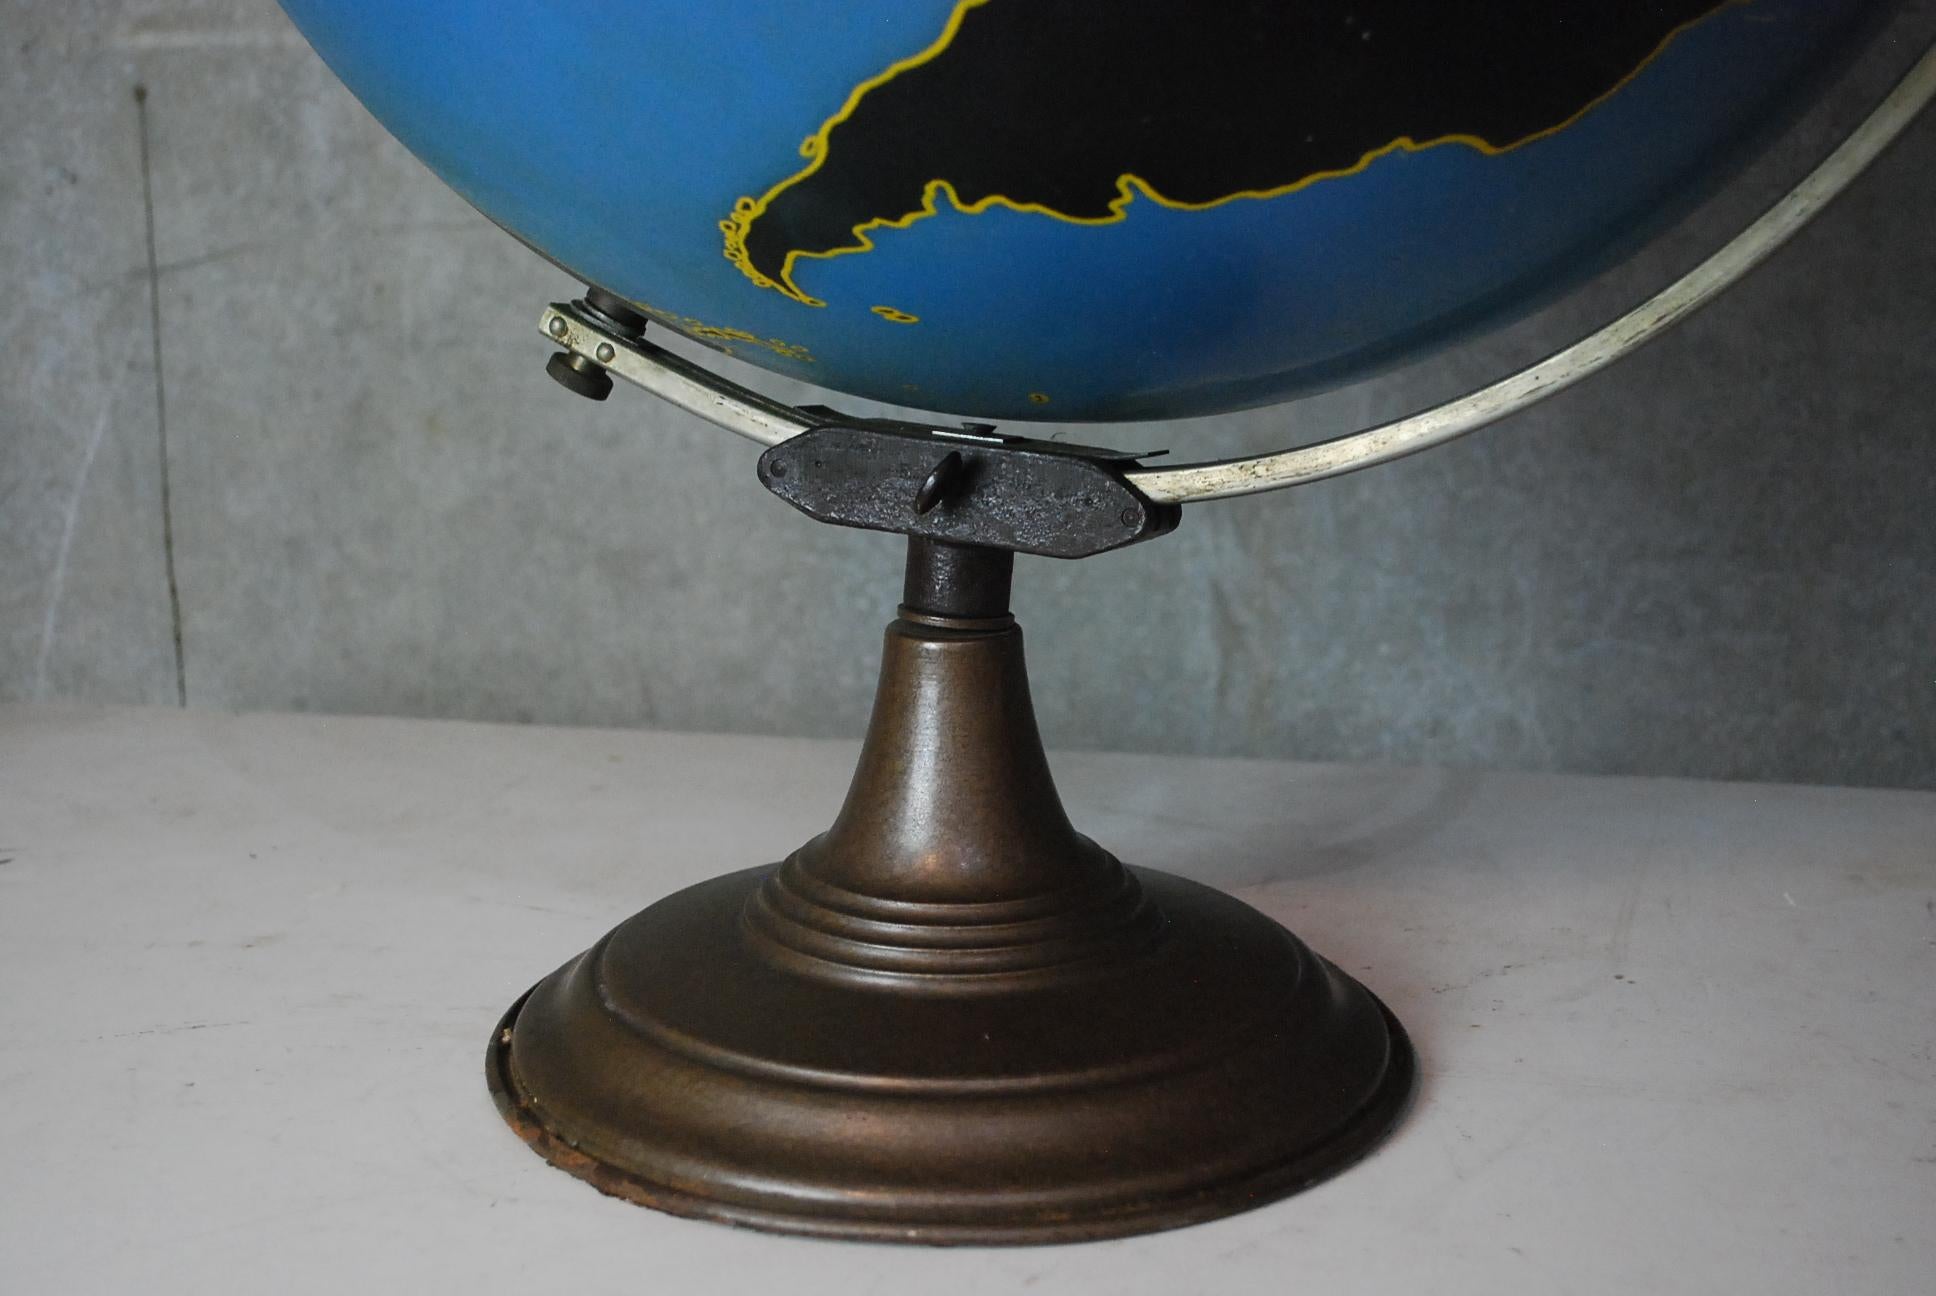 Denoyer Geppert of Chicago military world globe made of thick spun metal on a heavy iron stand. In chalkboard style features this was an educational teaching instrument. 
Nice original paint.
Solid condition with no missing or loose parts. Stands